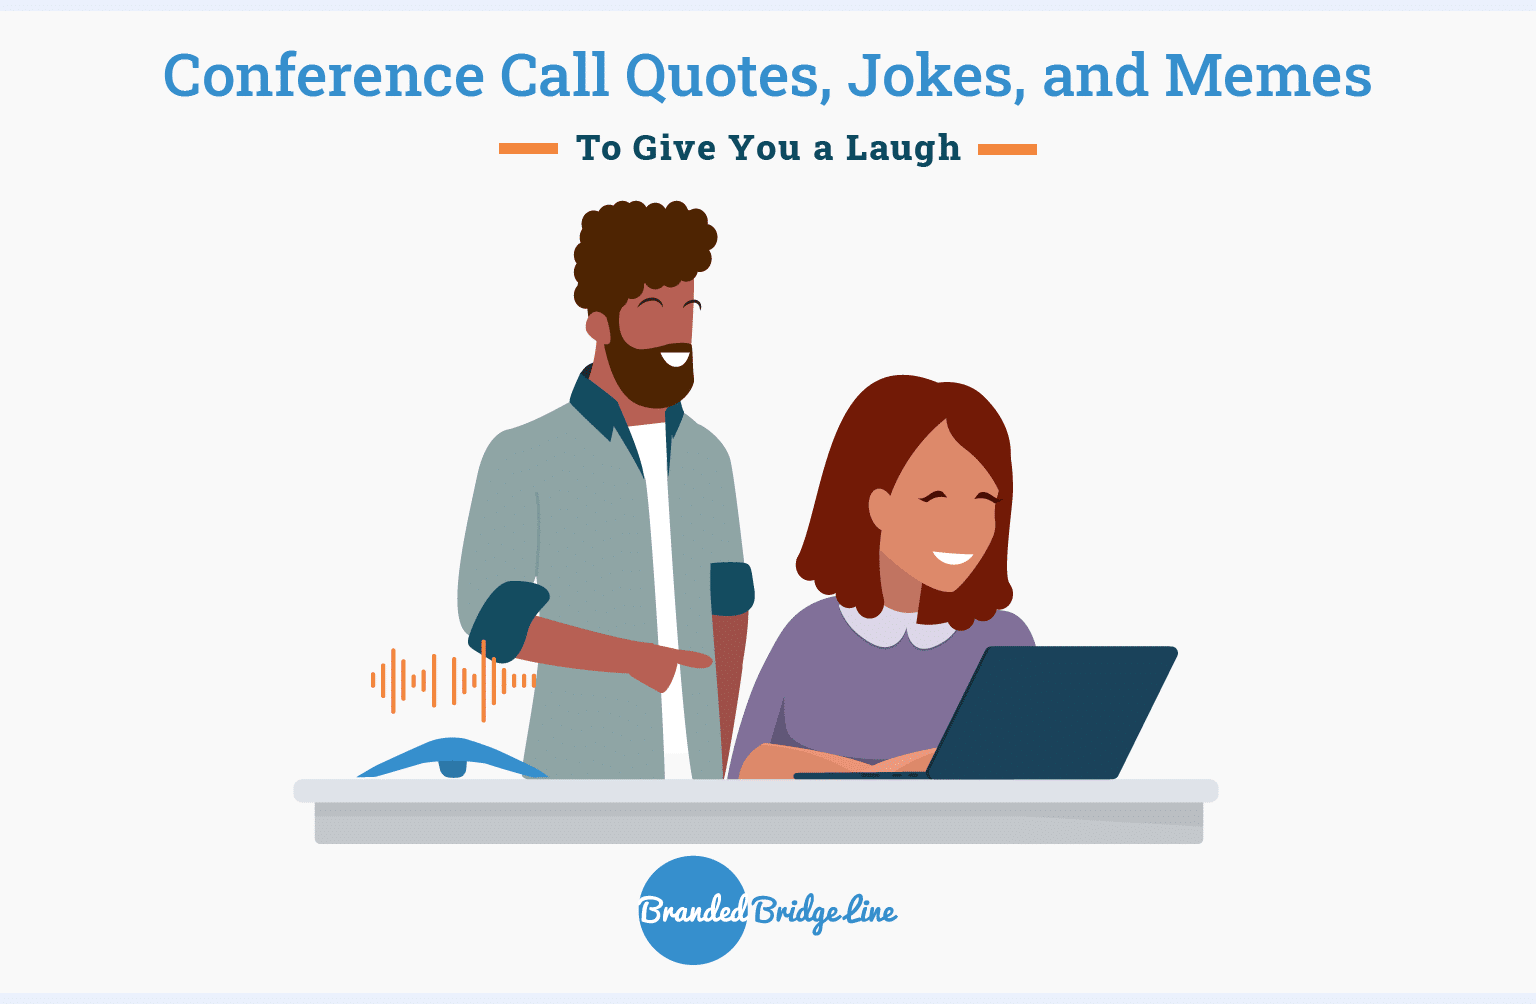 Conference Call Humor and Funny Quotes | Branded Bridge Line